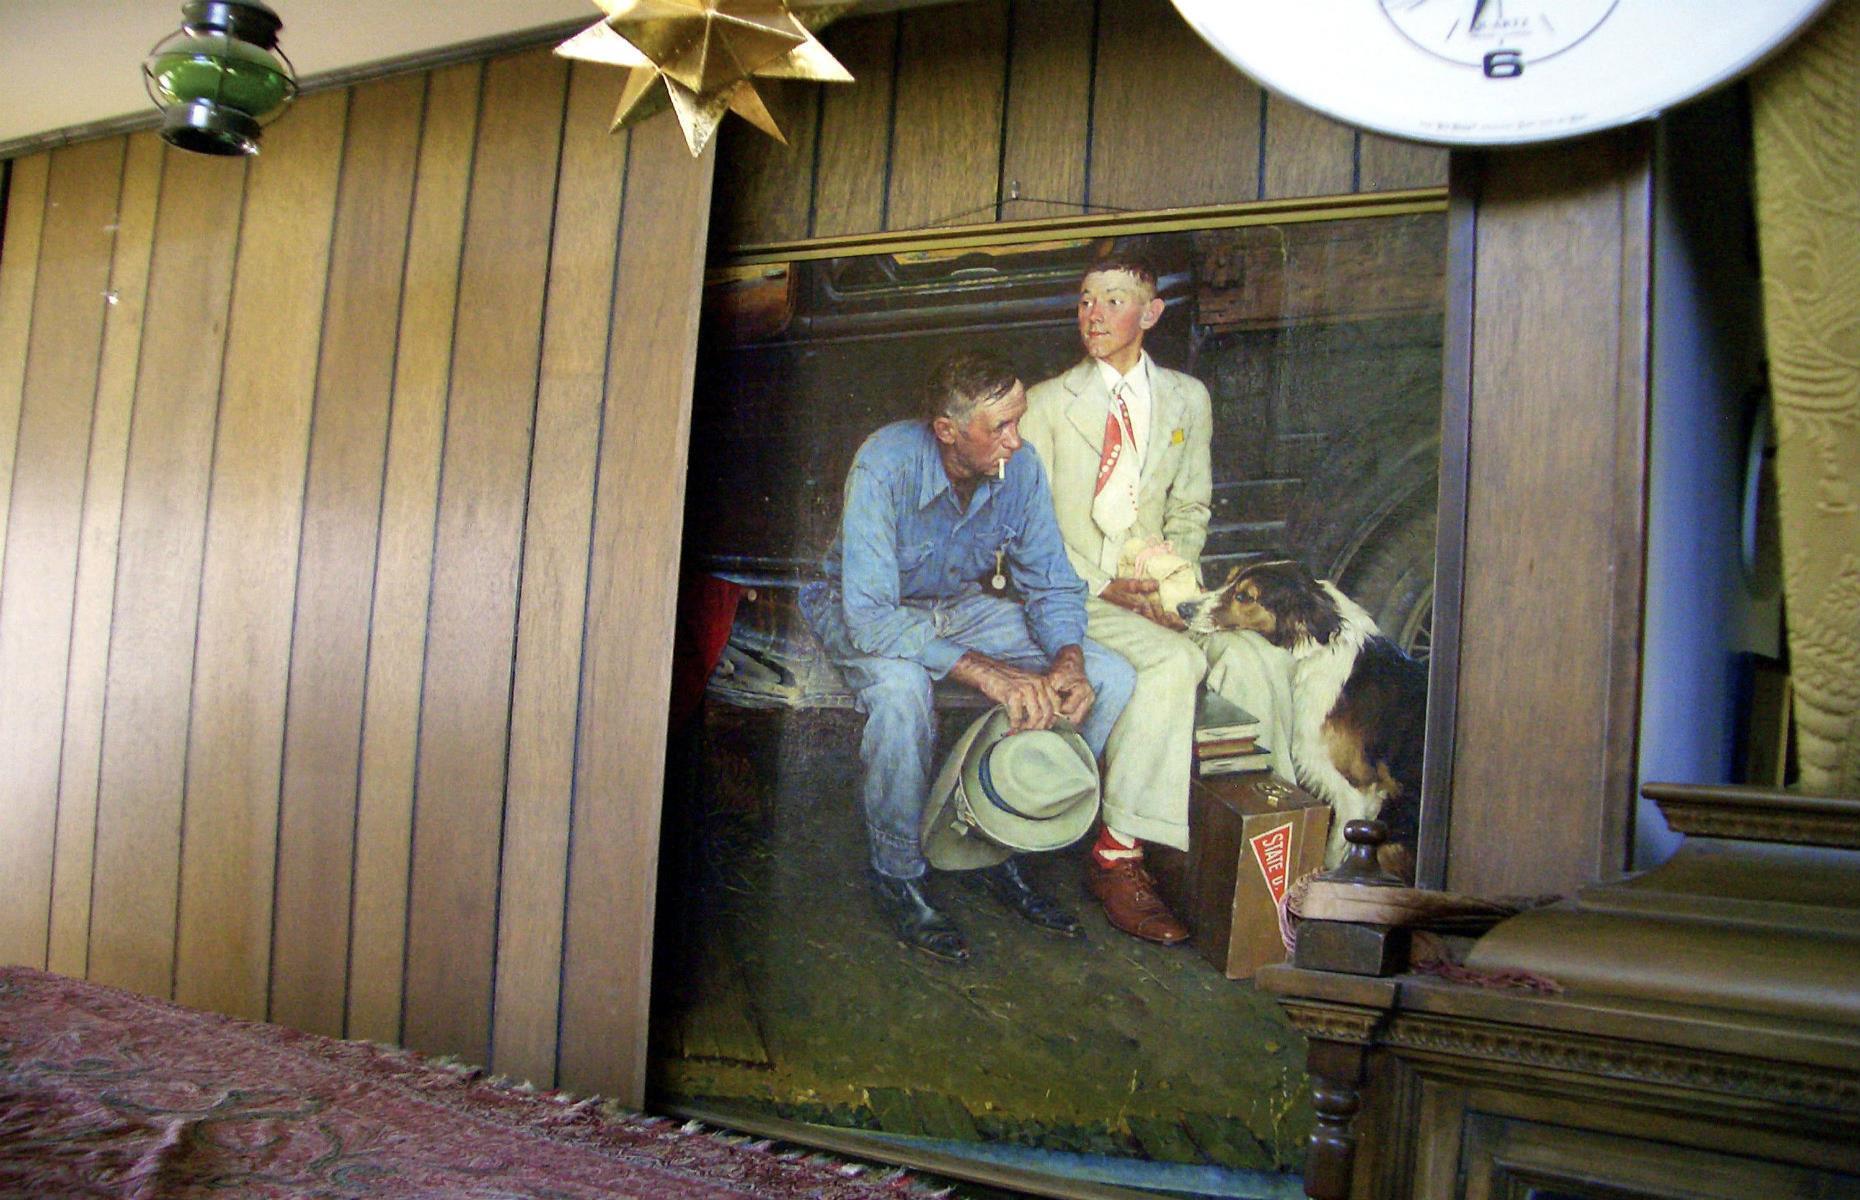 Norman Rockwell painting hidden in the walls: $15.4 million (£11.6m)